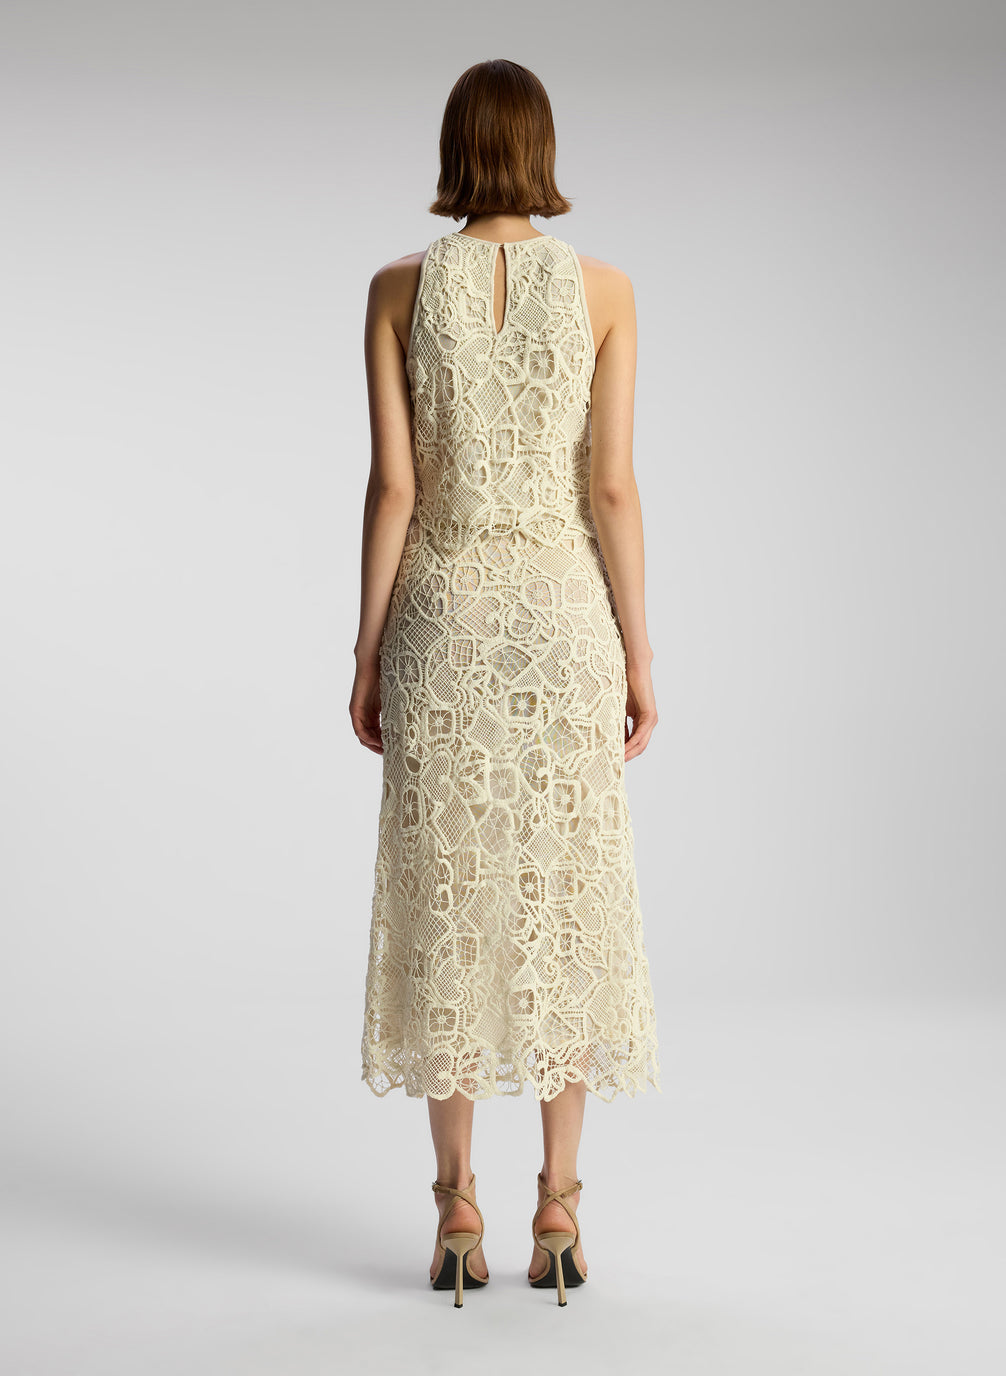 back view of woman wearing off white lace shirt and skirt set